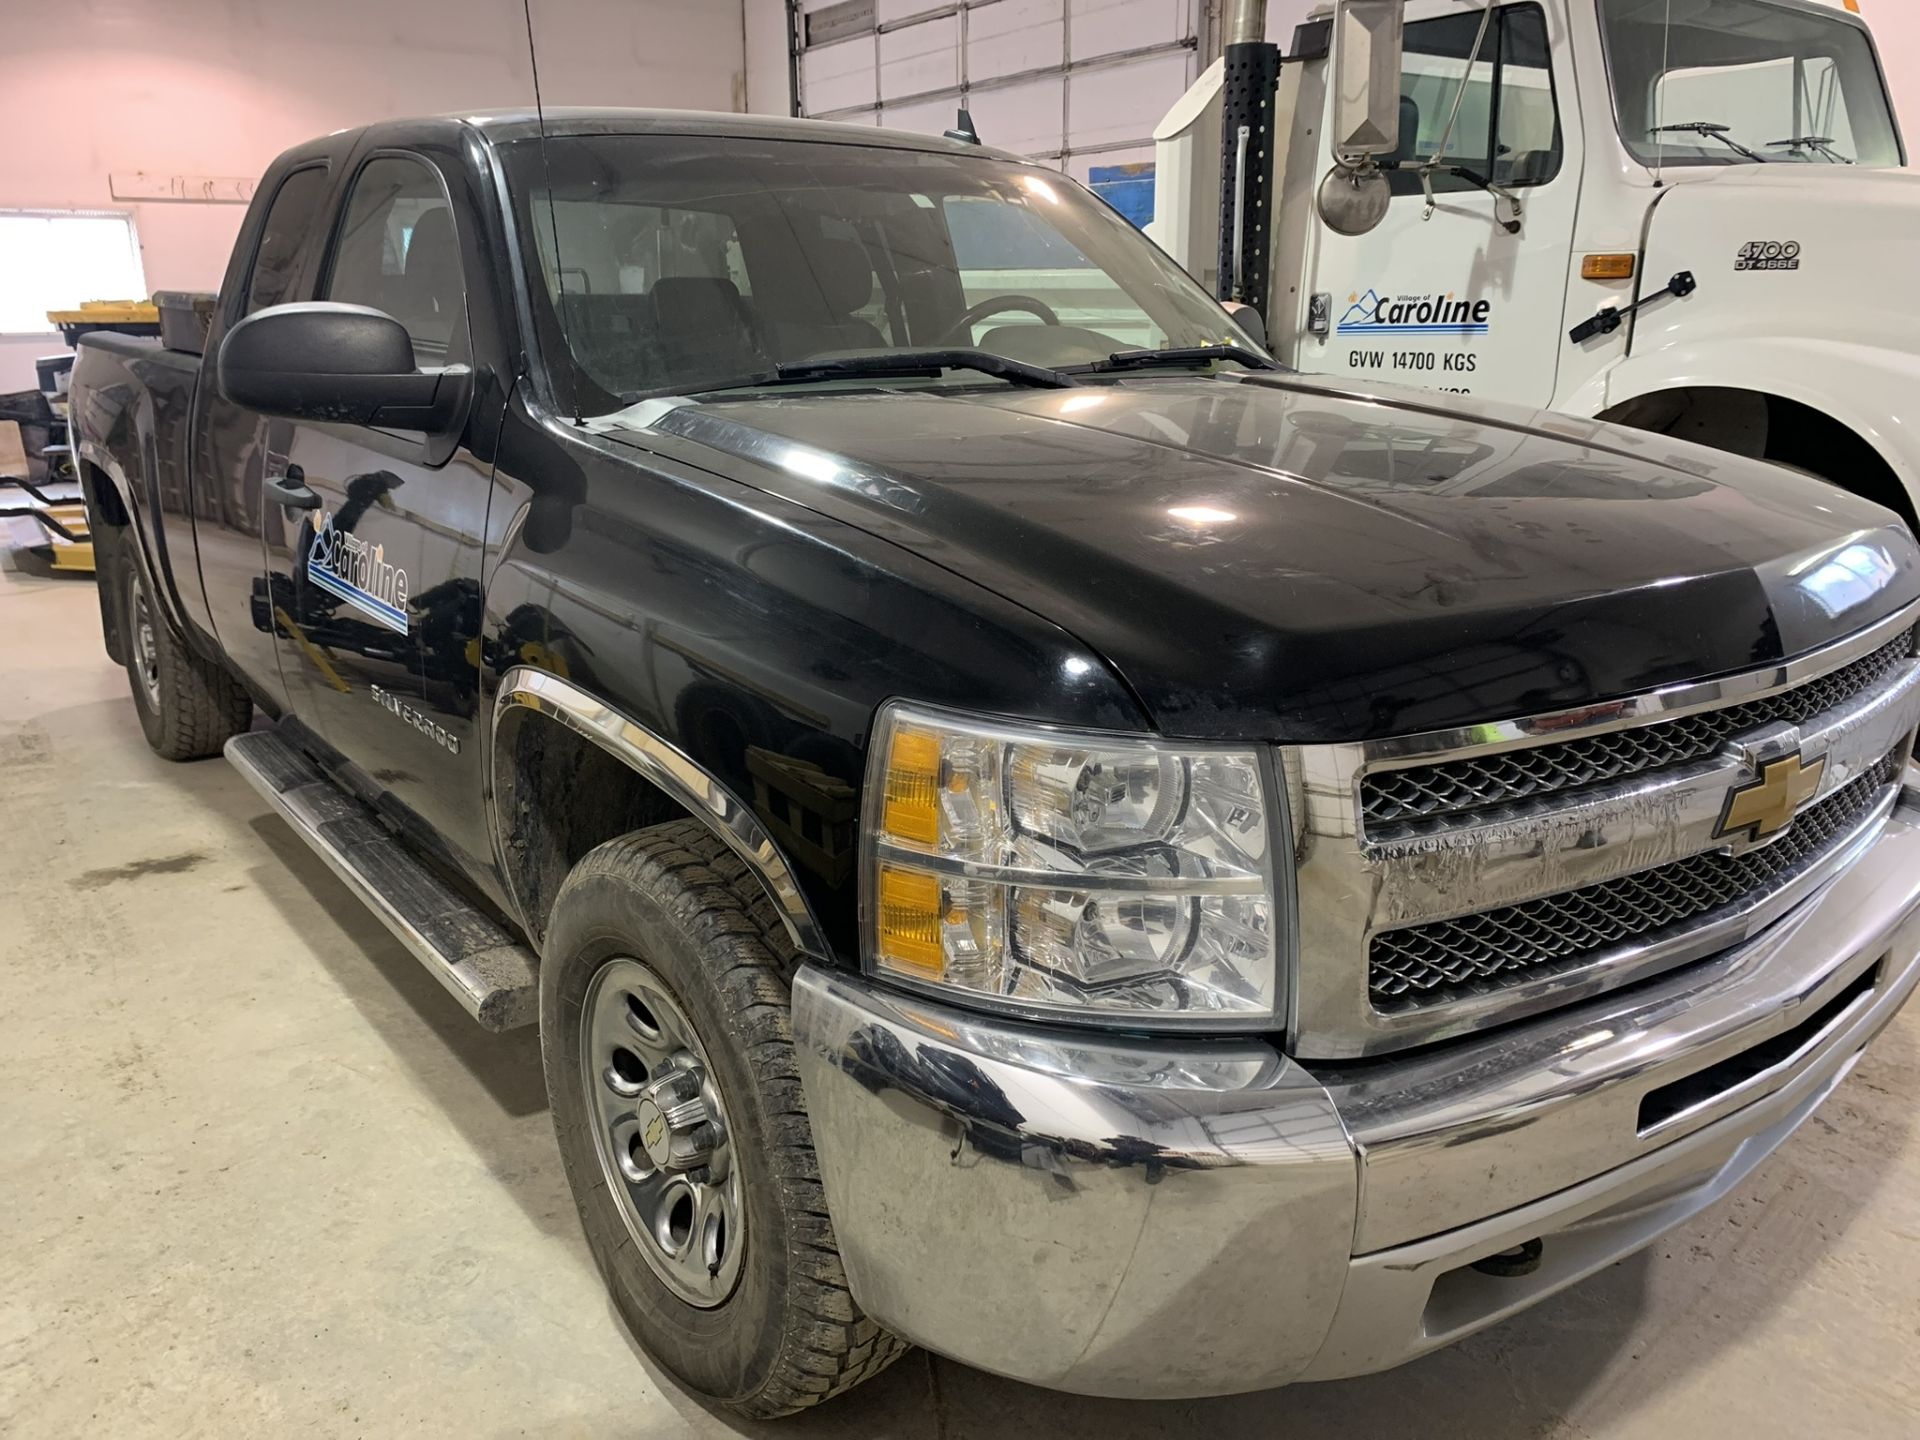 **OFFSITE** 2012 CHEV SILVERADO K1500 4X4 4-DR. EXTENDED CAB SHORT BOX PICKUP, W/V8-GAS, AT, AIR - Image 2 of 6